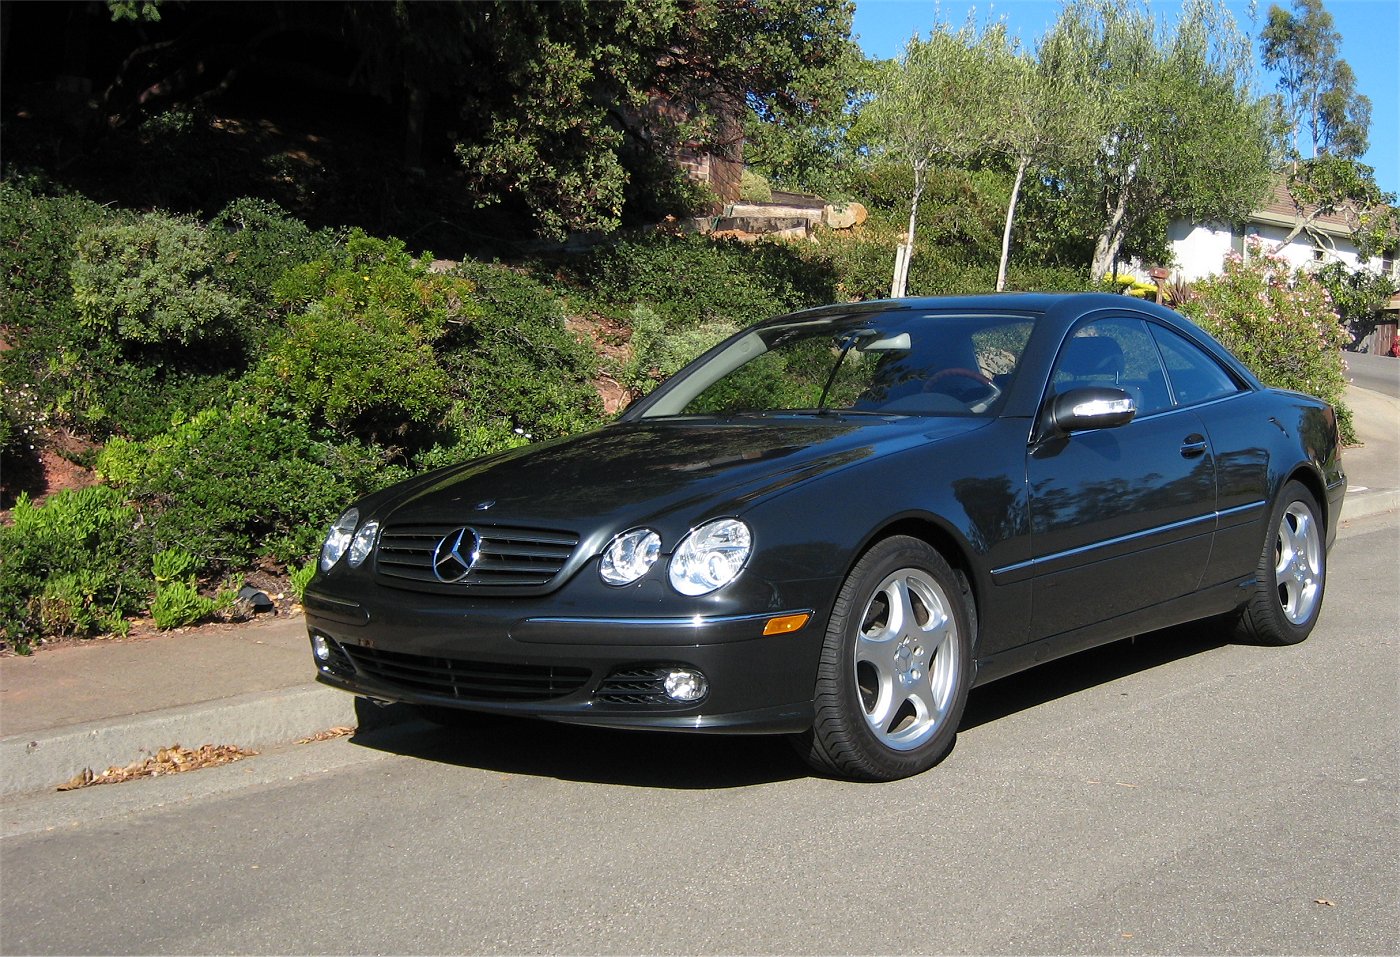 2004 Mercedes cl500 lowers when parked #3